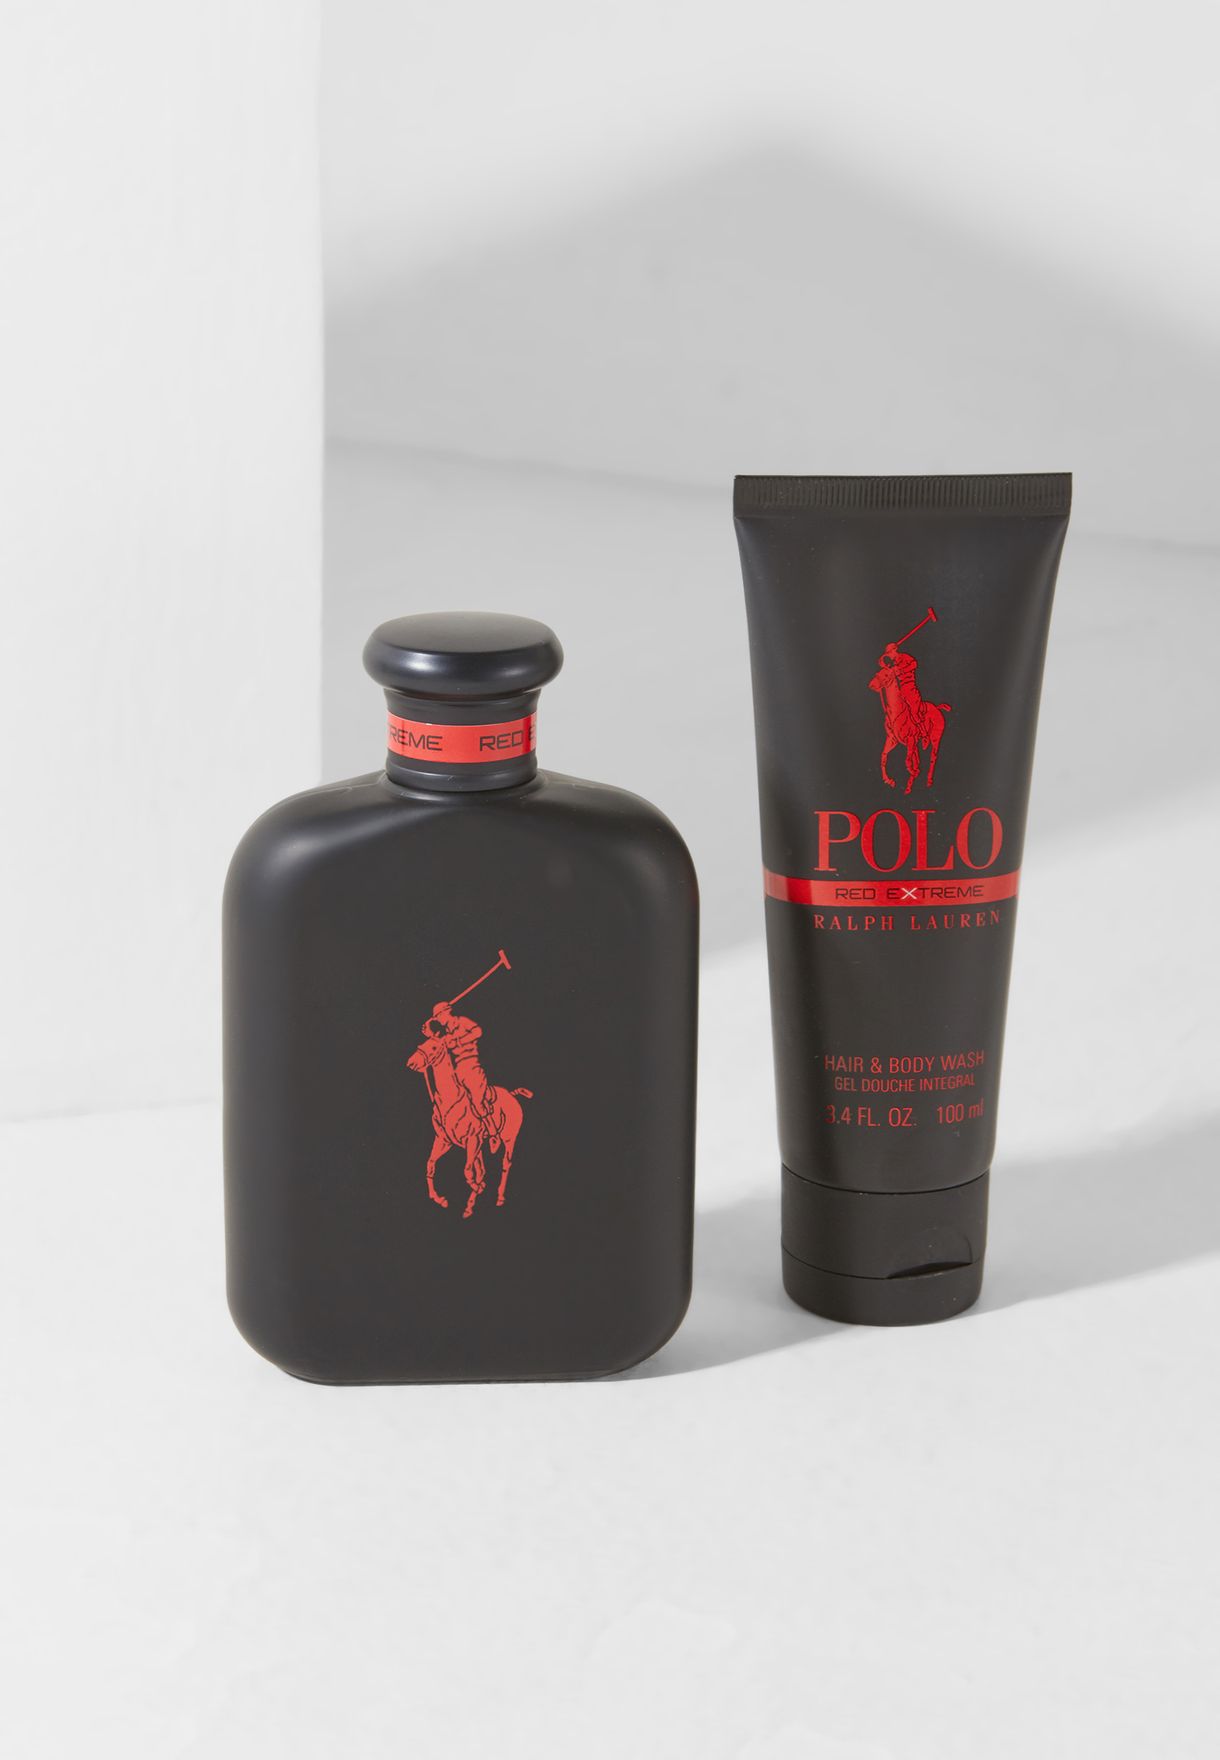 polo red extreme set